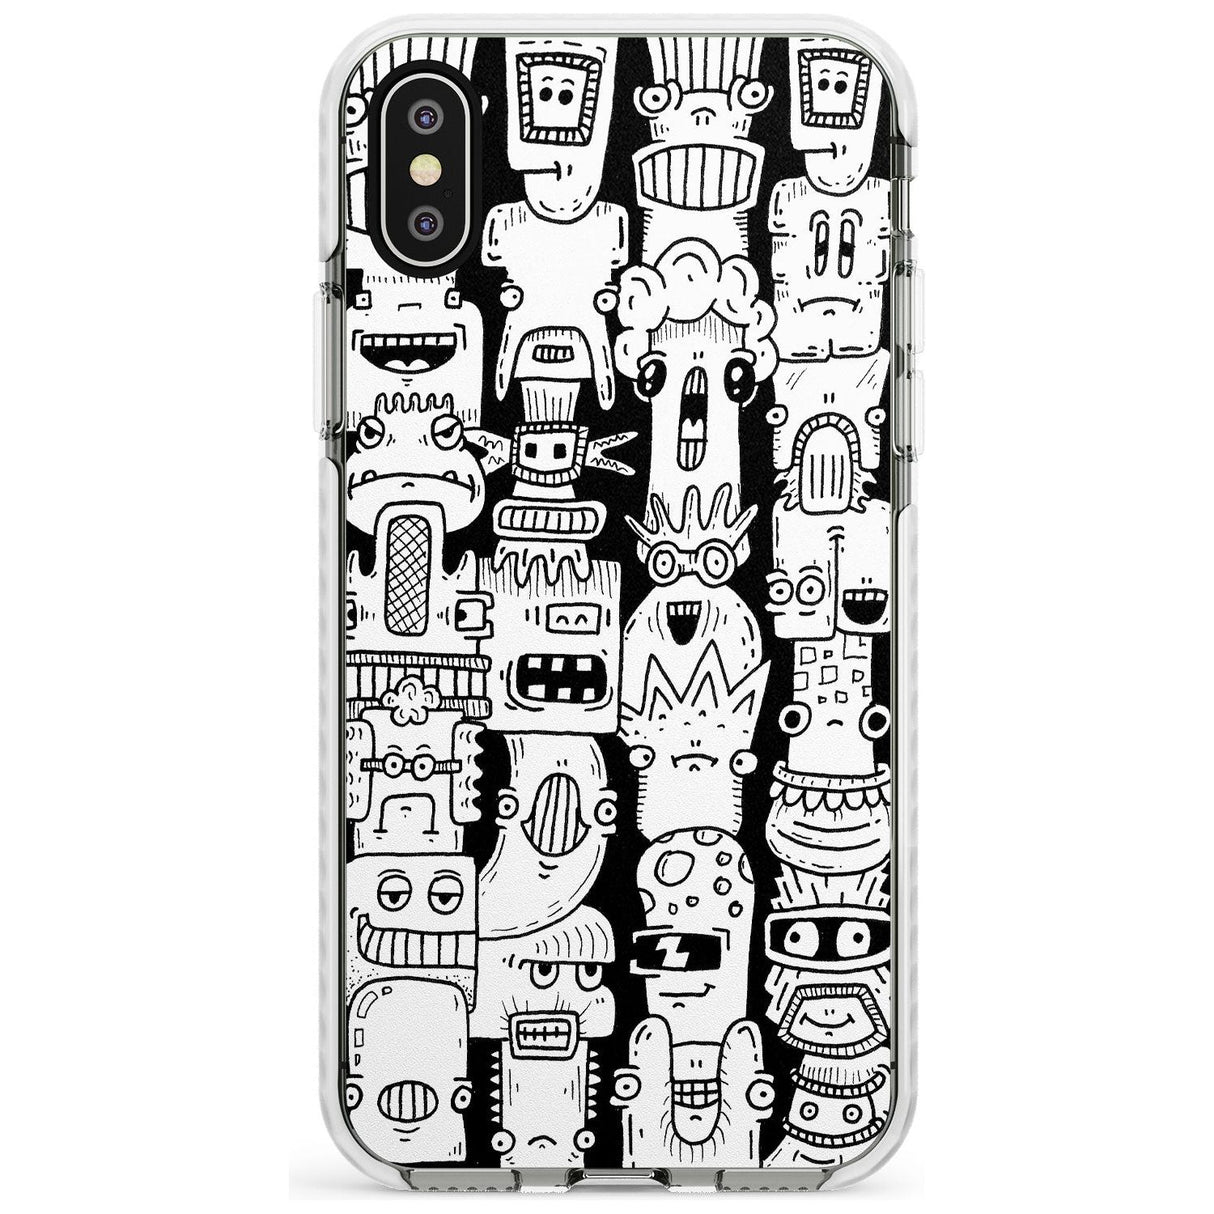 Monochrome Heads Impact Phone Case for iPhone X XS Max XR